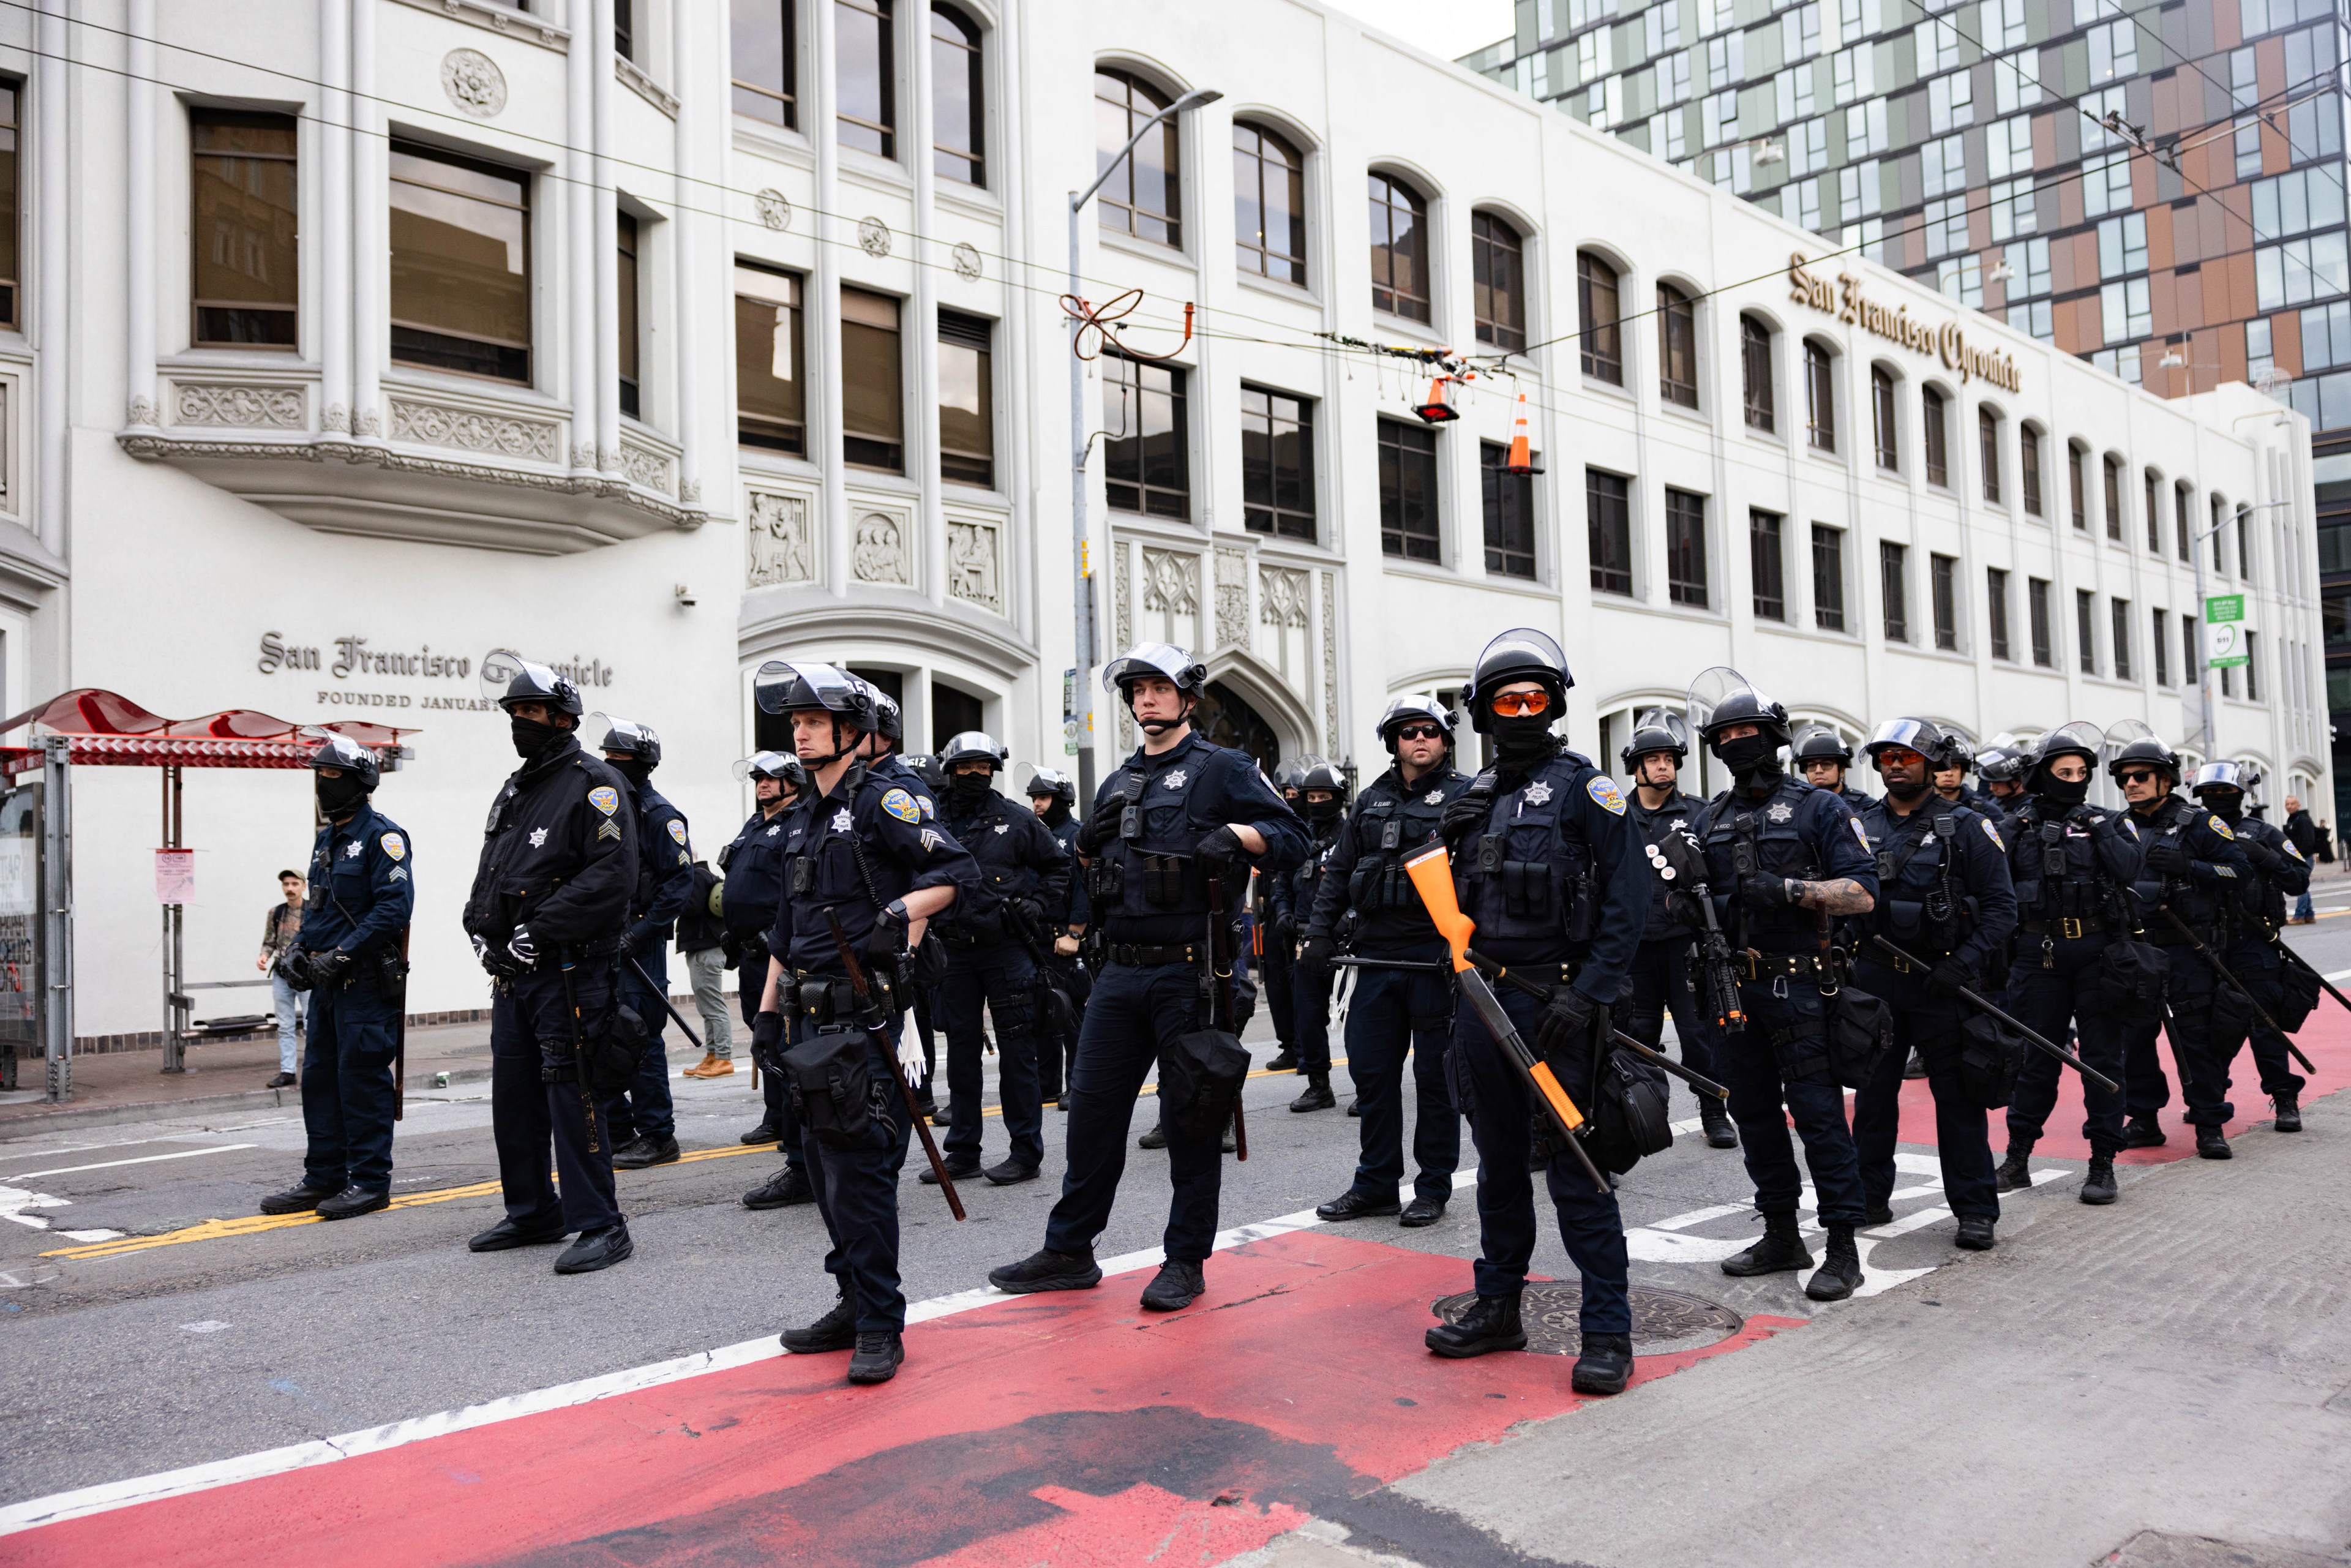 A group of riot police in gear stands ready on a city street, with a building labeled &quot;San Francisco Chronicle&quot; behind them.